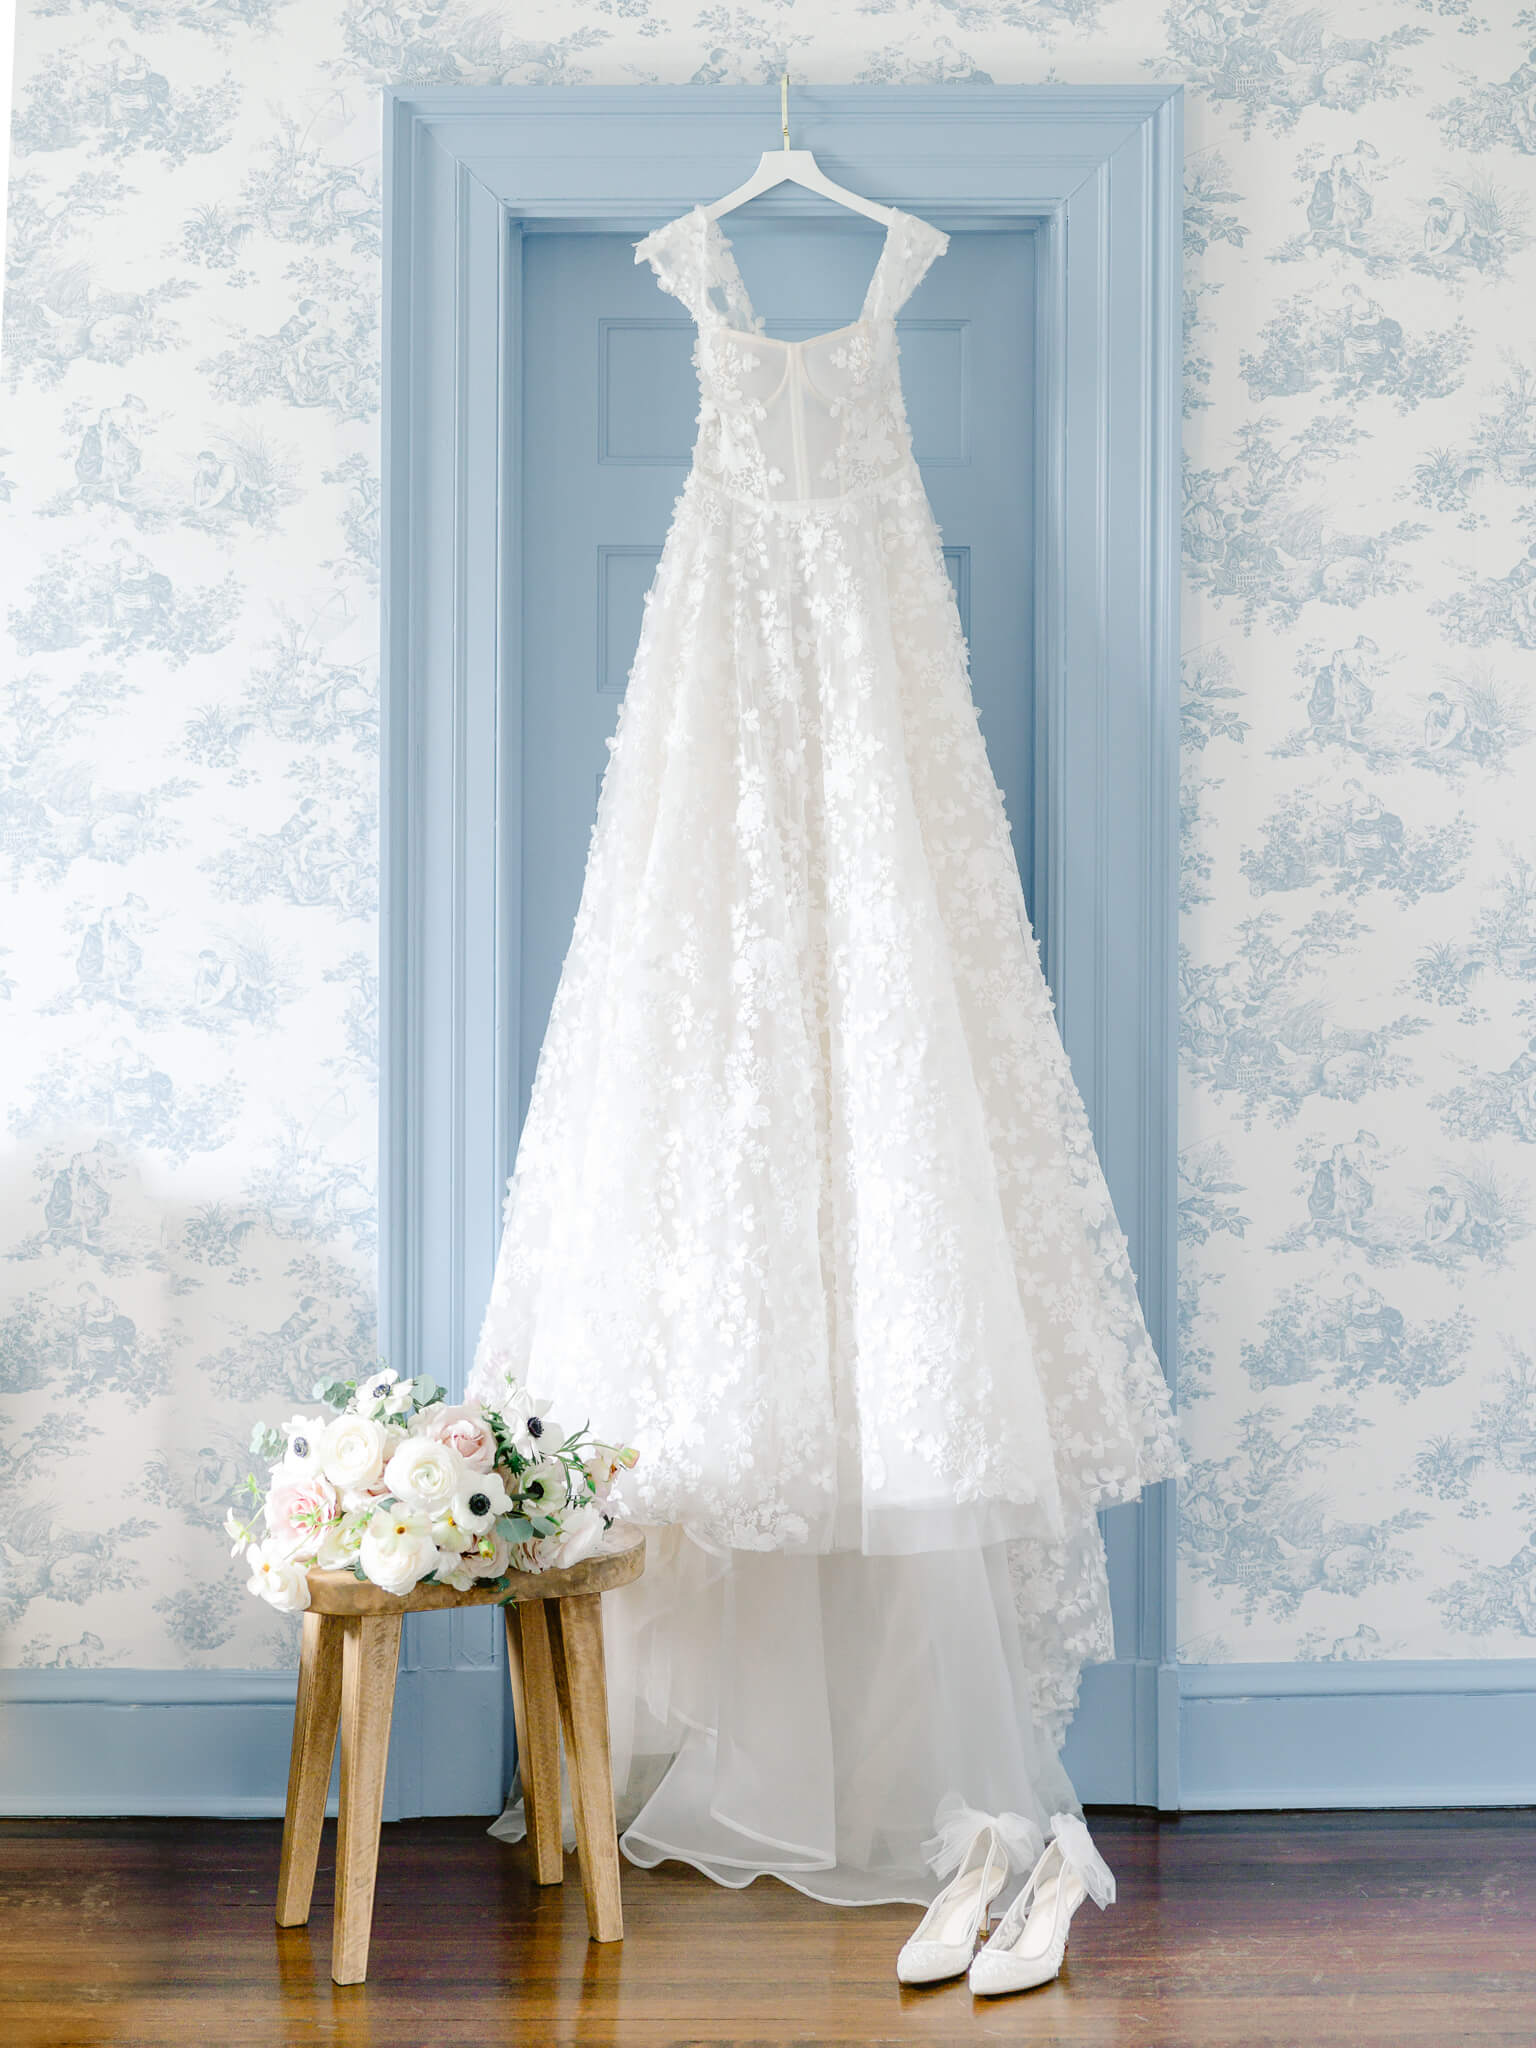 An Eisen Stein Bridal gown hanging on a blue doorframe in a blue toile wallpaper room with the bouquet on a wooden stool next to it.